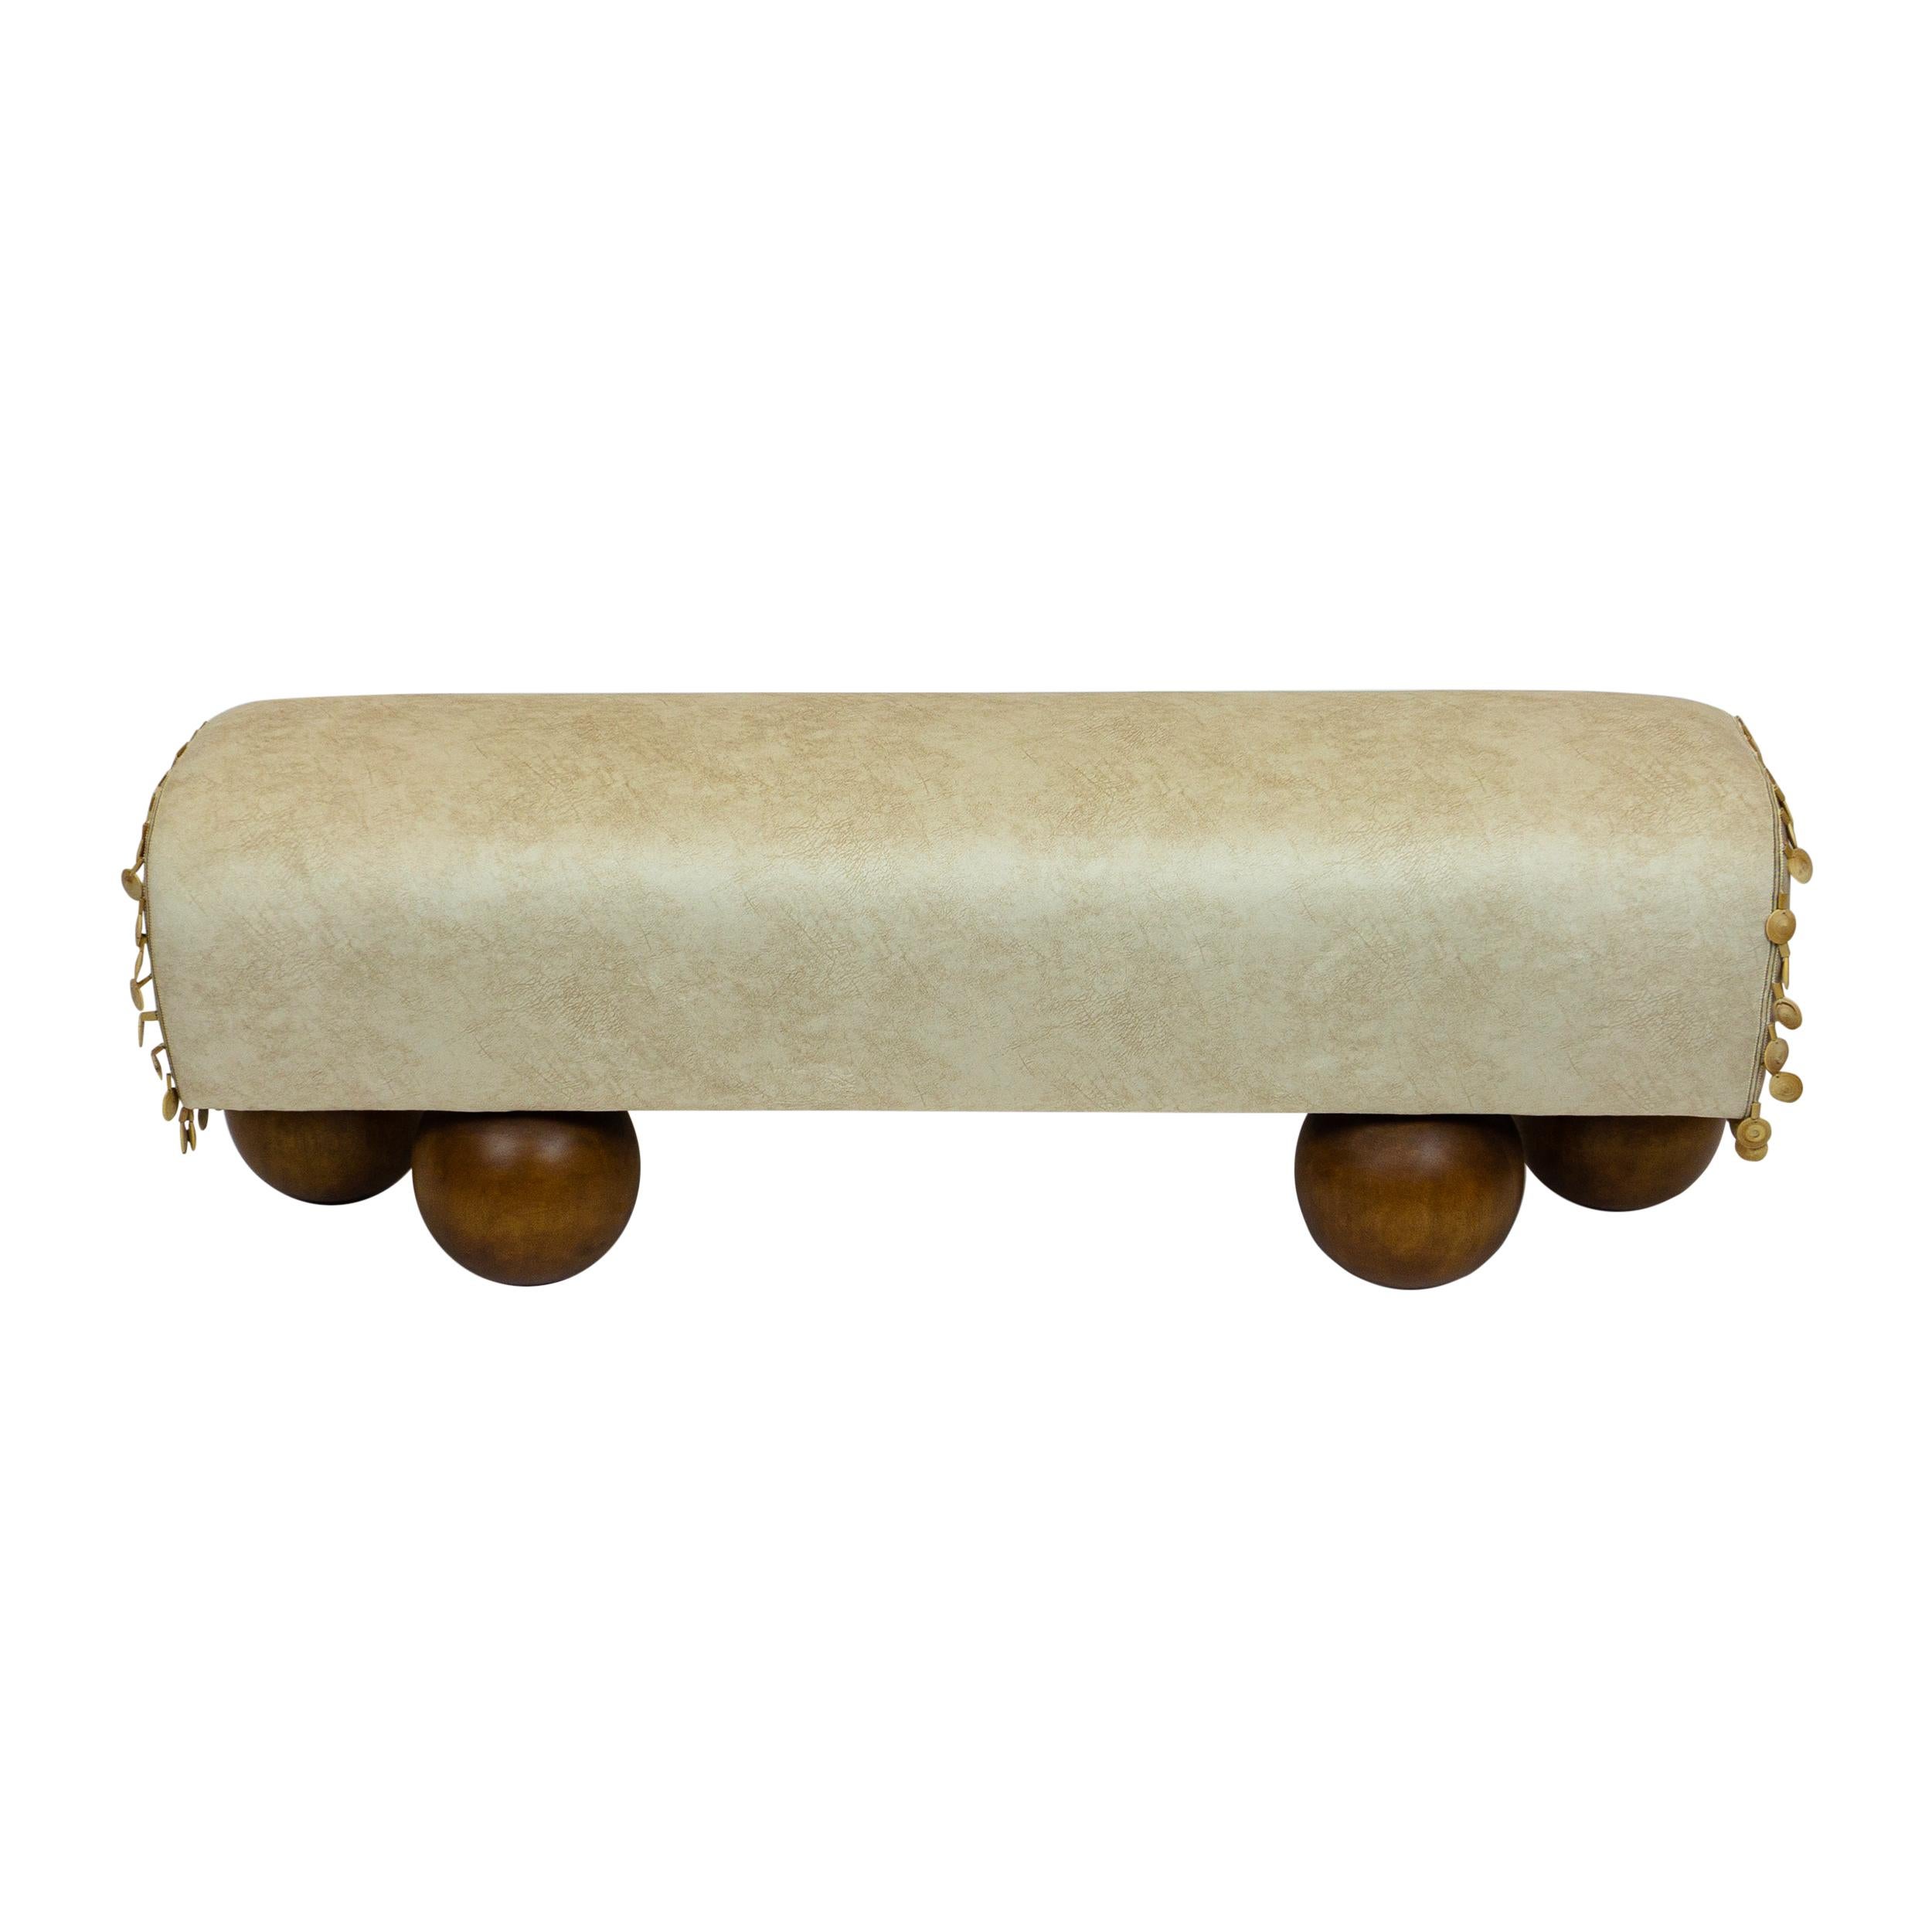 American Walnut Ball Foot Bench with Saddle Shaped Seat - Customizable For Sale